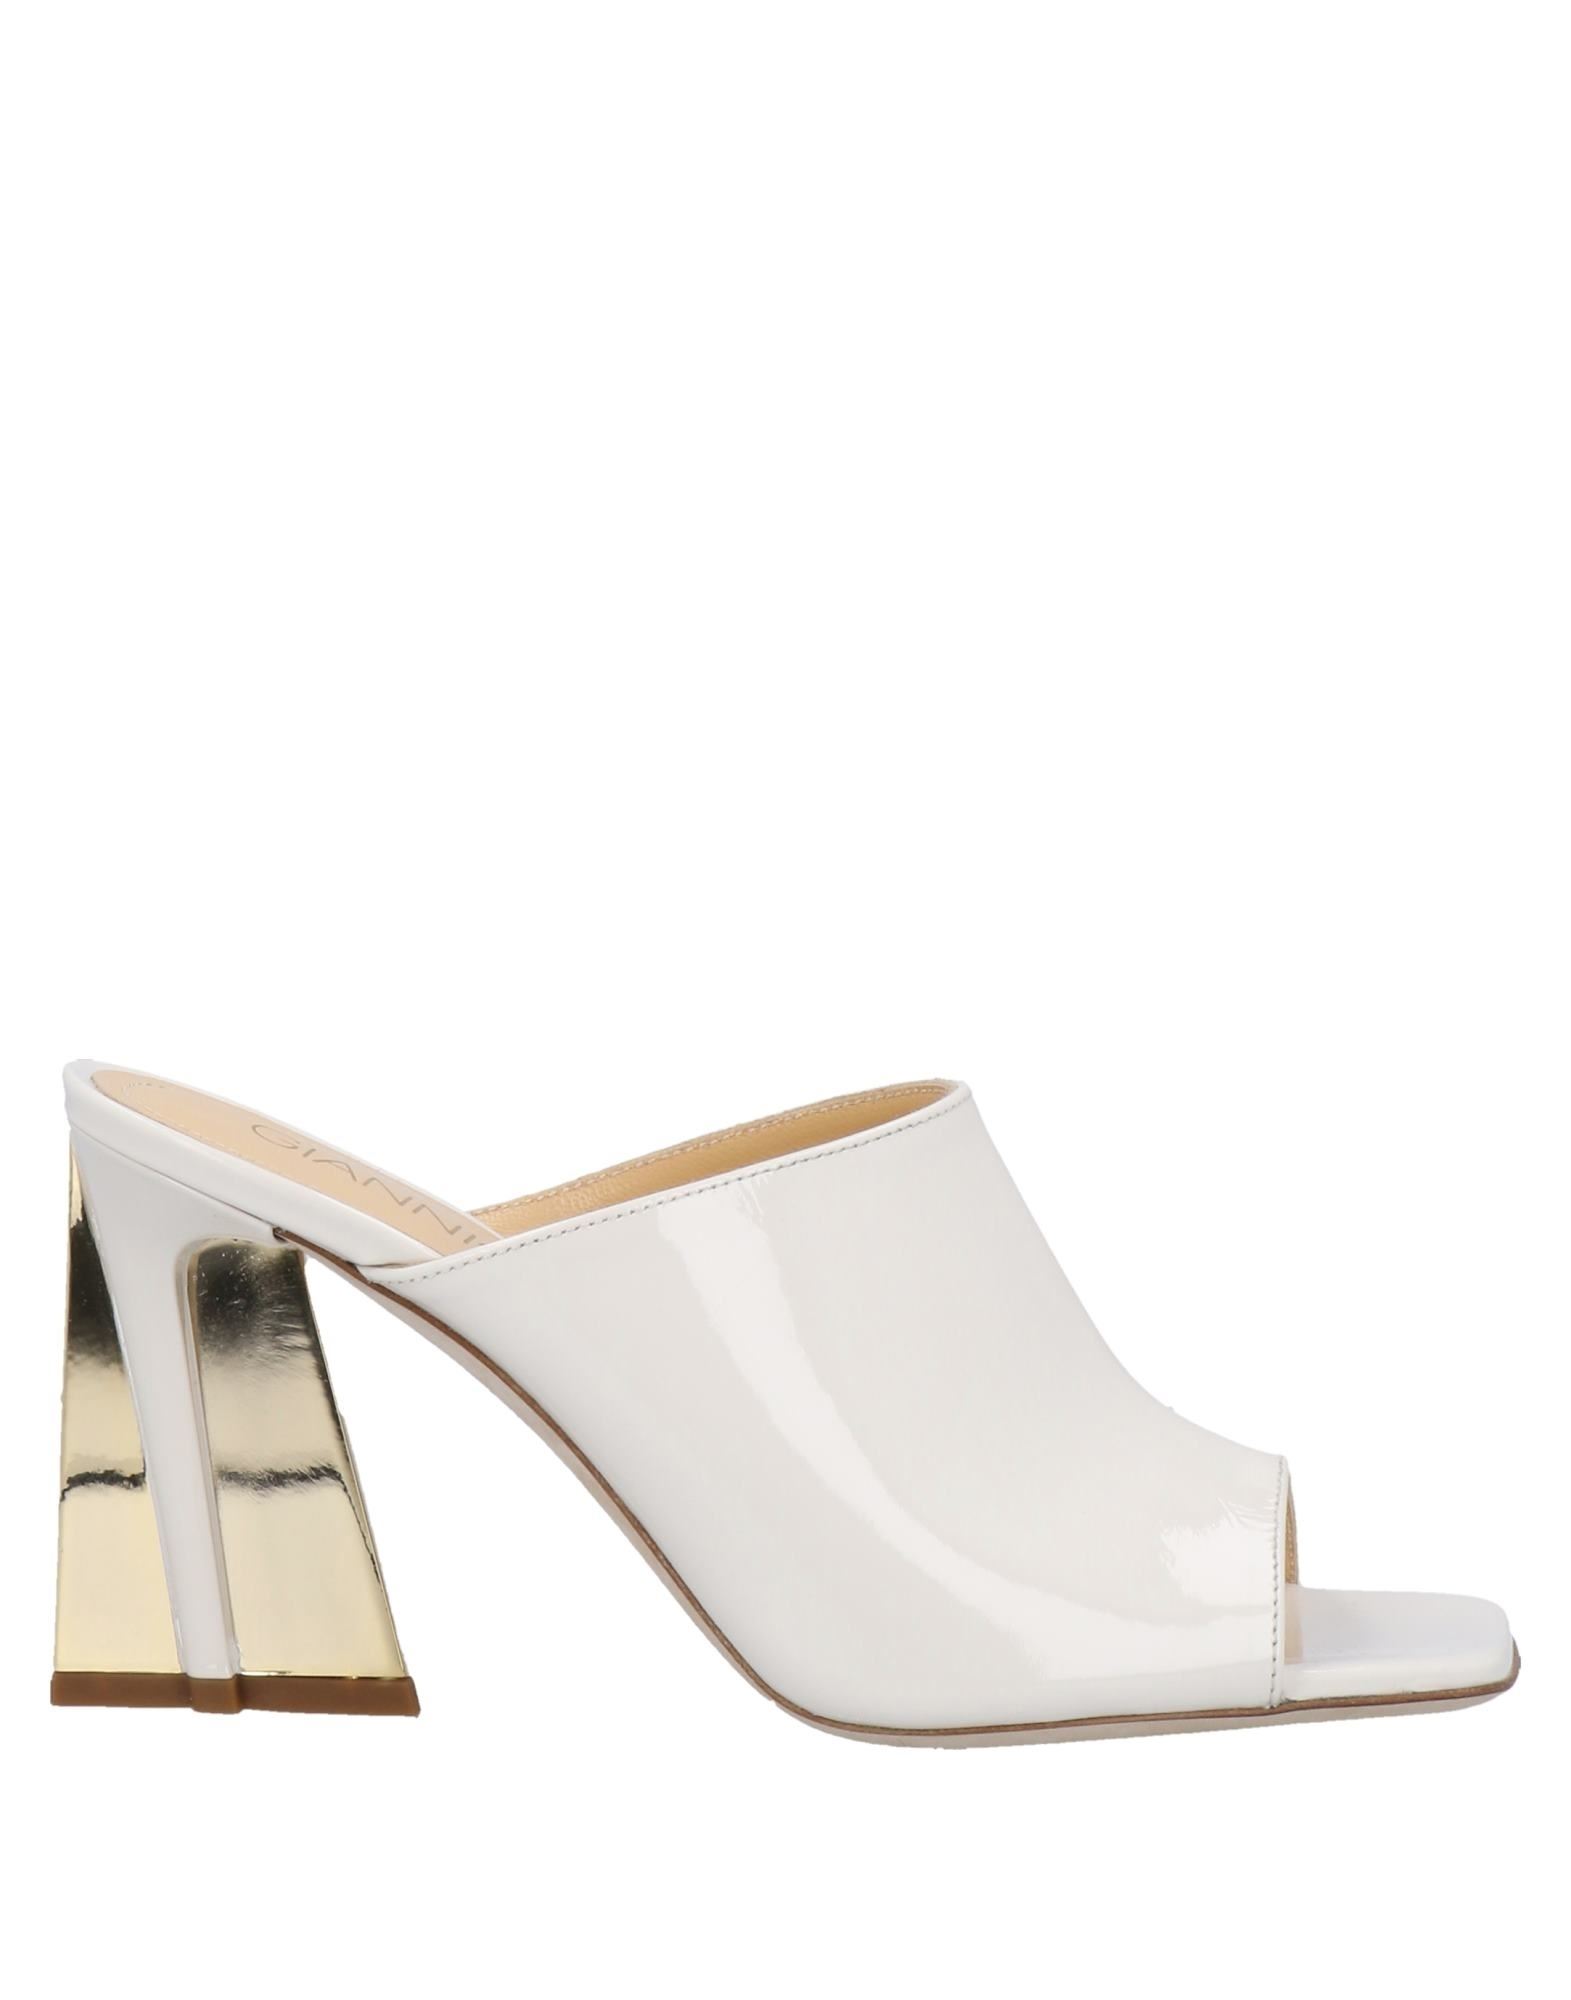 Giannico Sandals In White